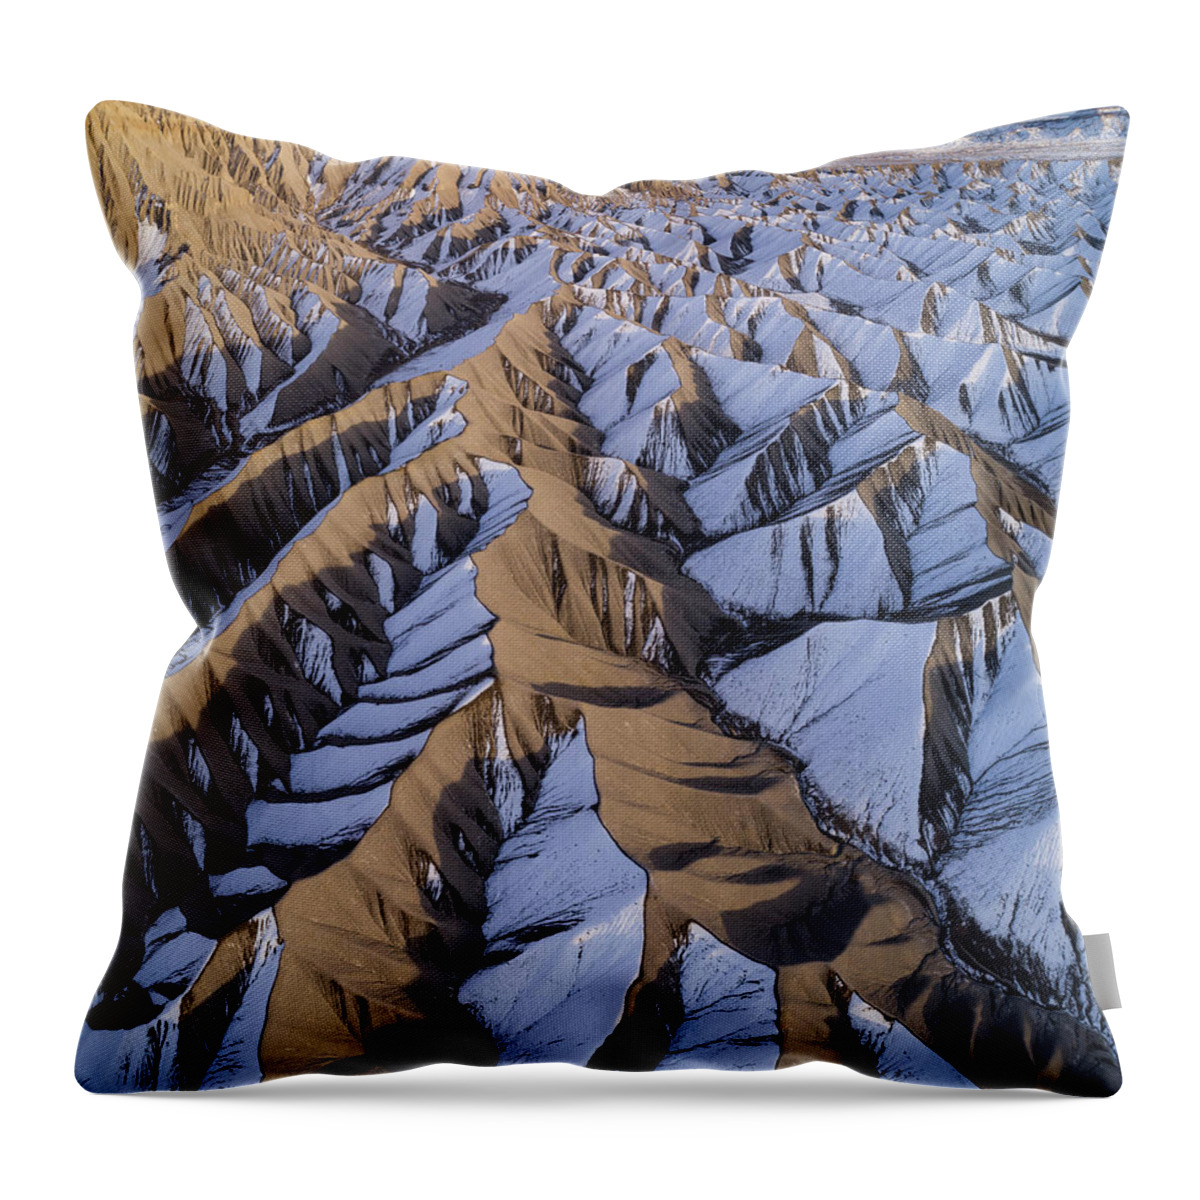 Utah Throw Pillow featuring the photograph Desert Angles by Wesley Aston